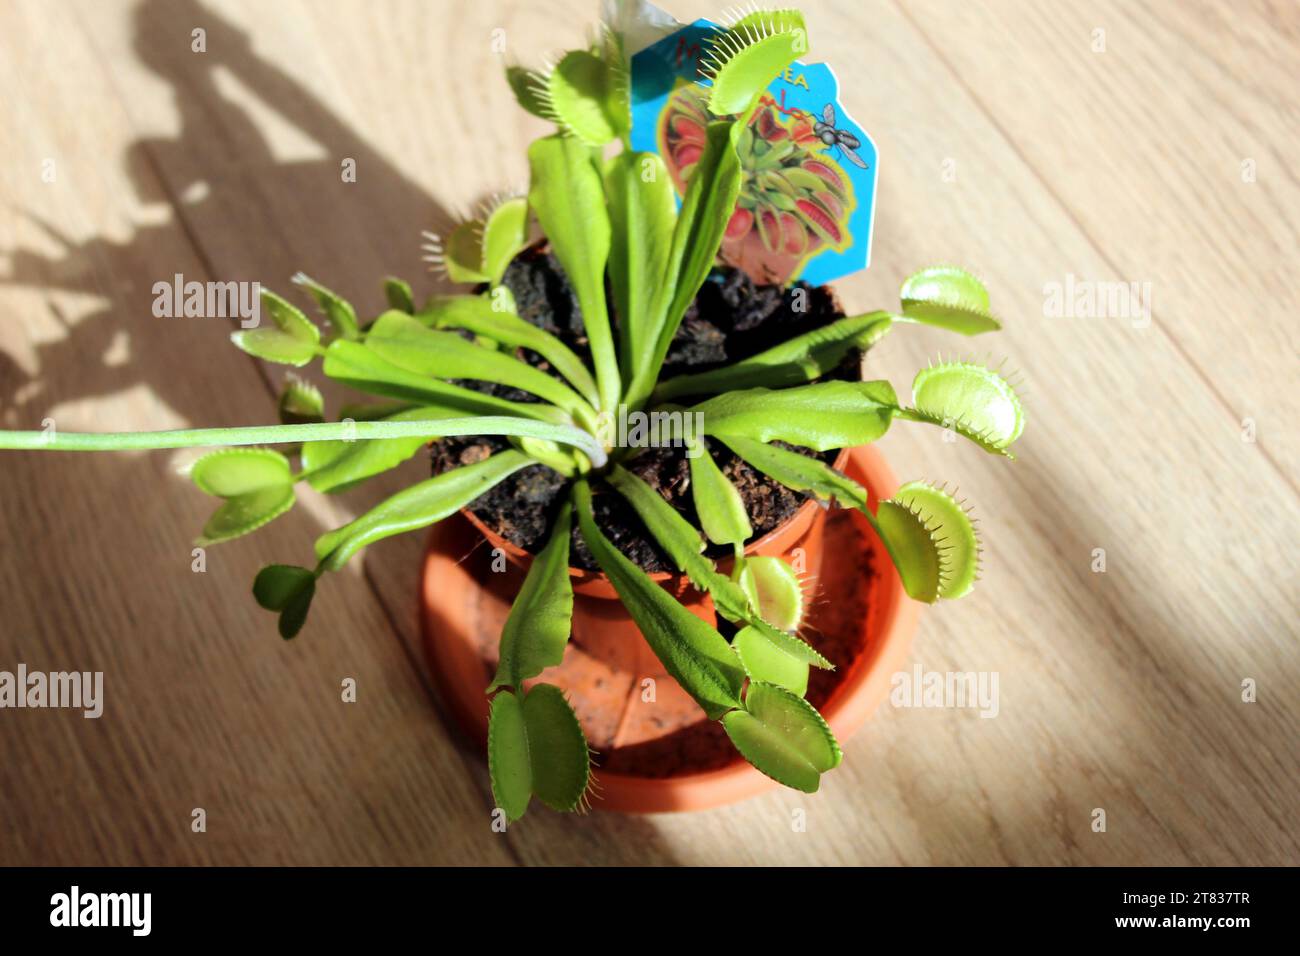 Dionaea Muscipula carnivorous plant in bloom in a pot Stock Photo